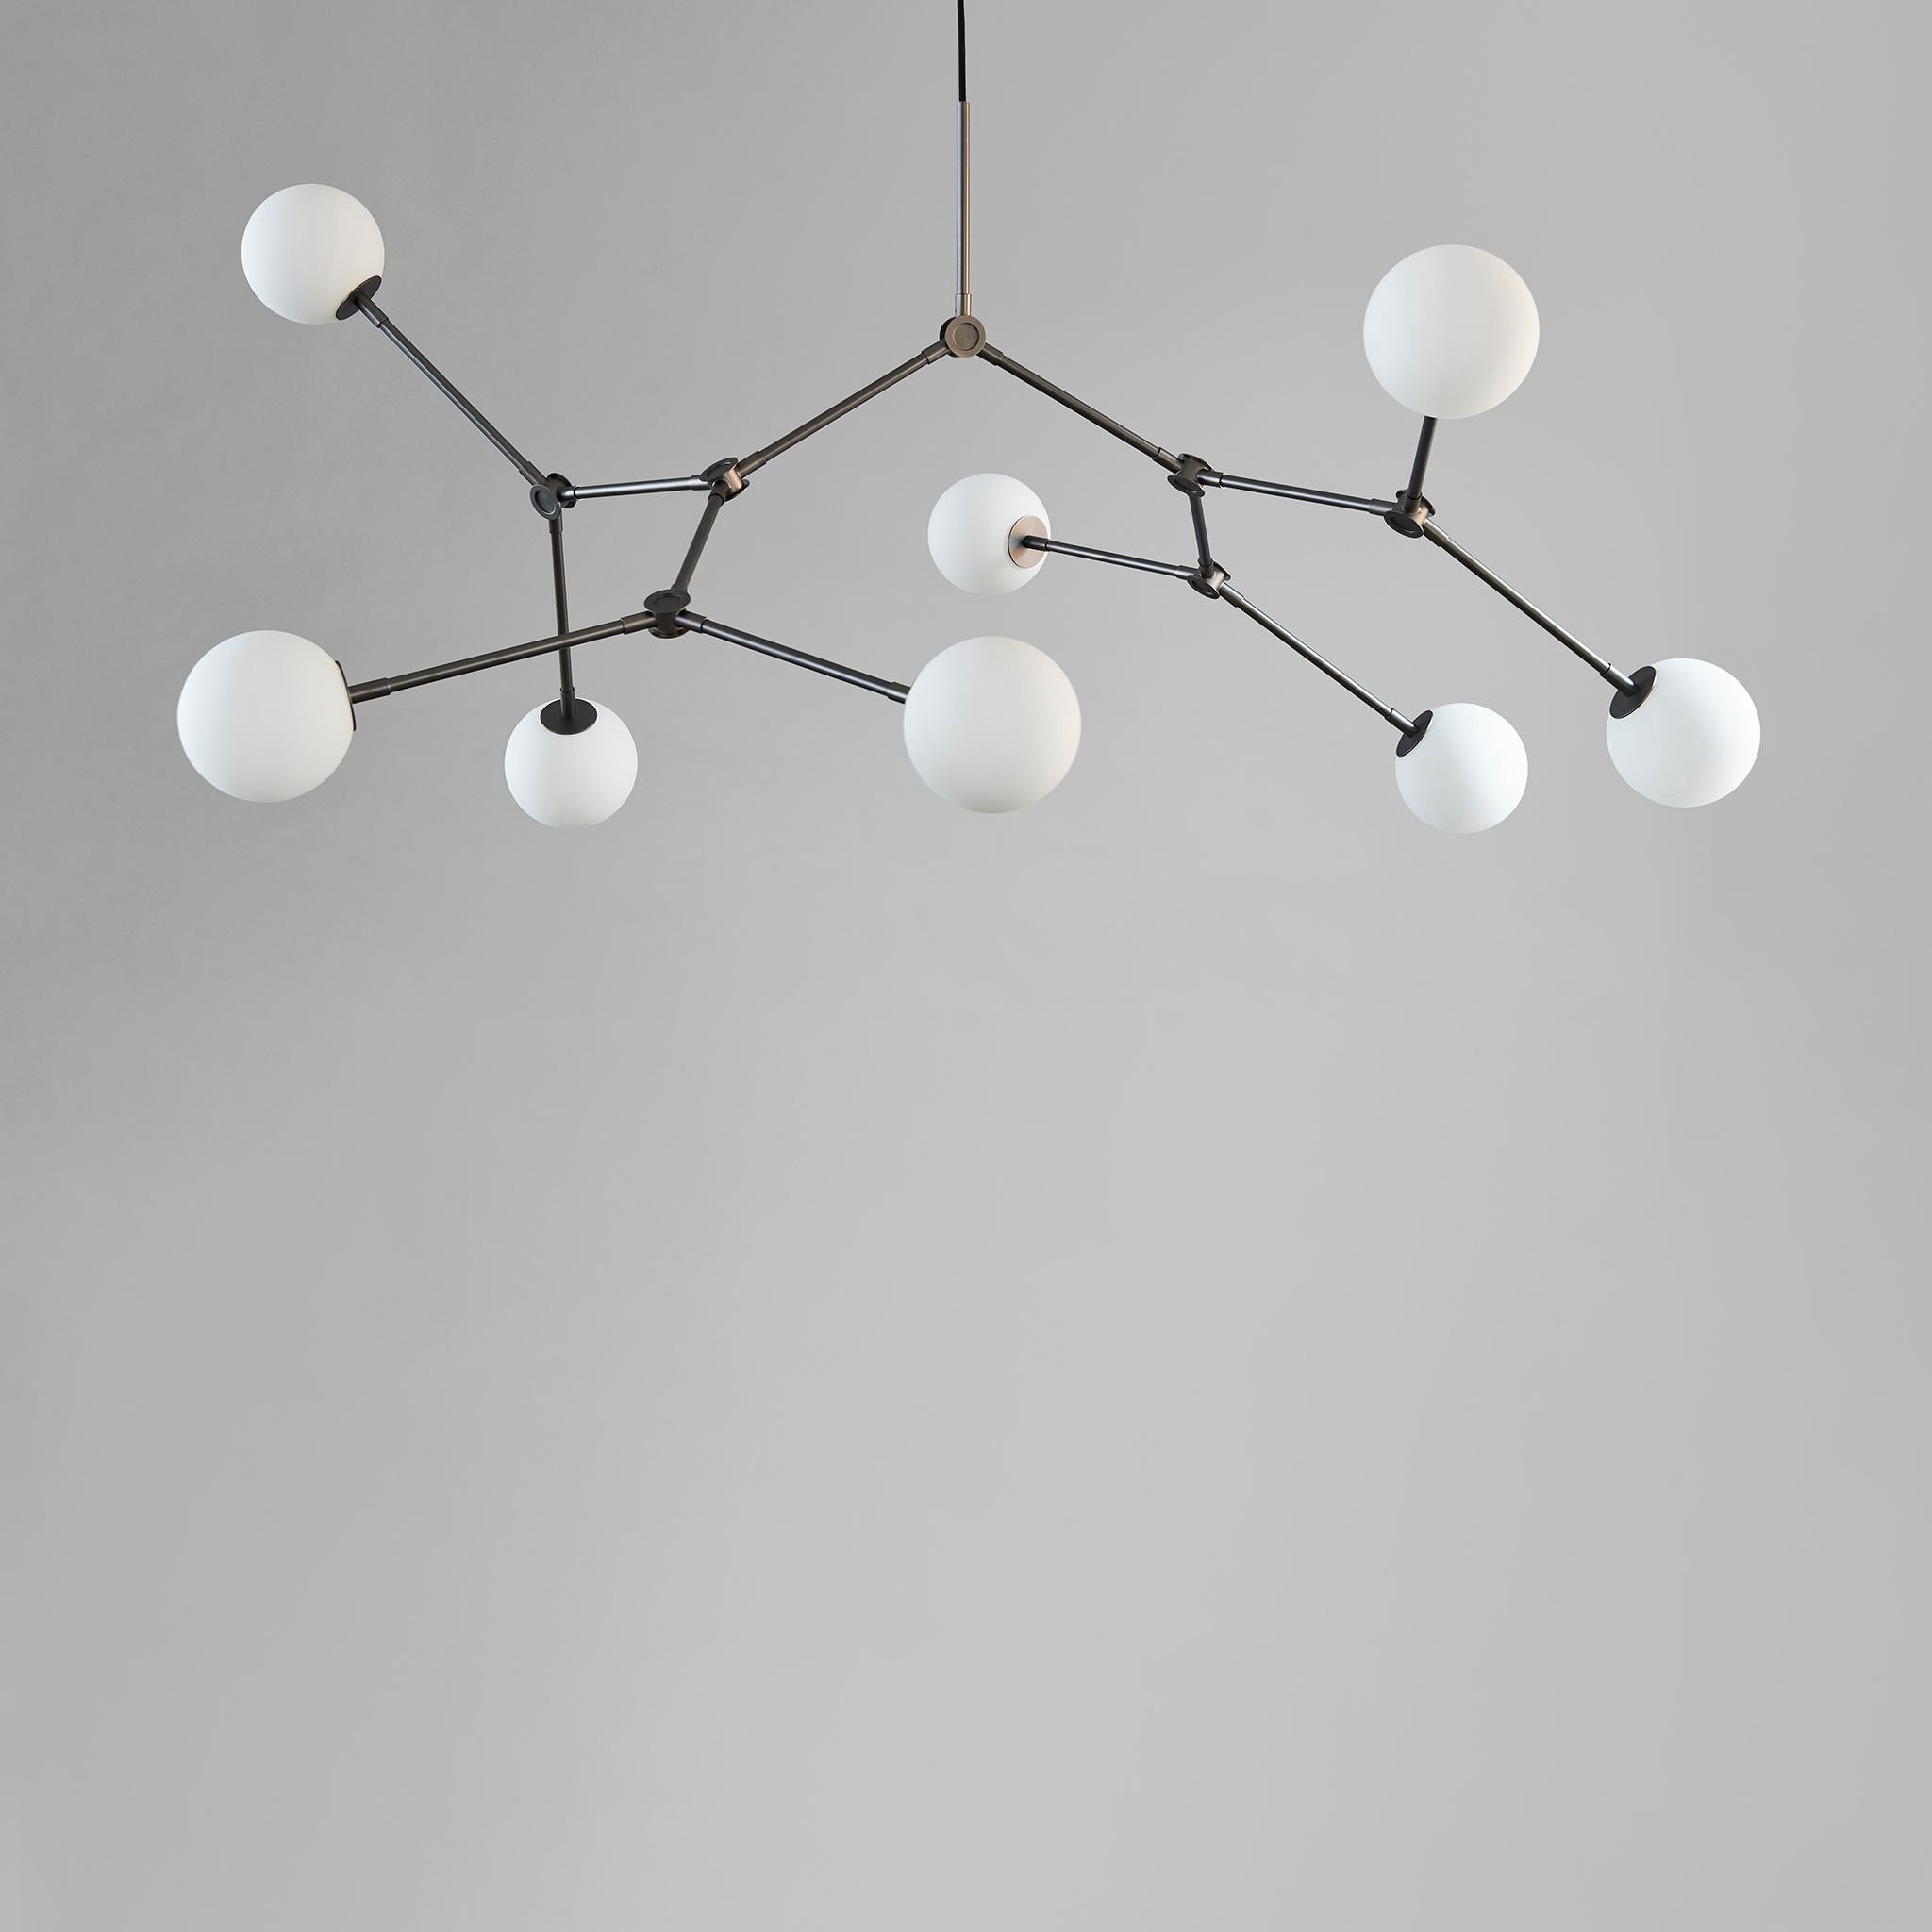 Drop chandelier Bulp by 101 Copenhagen
Designed by Kristian Sofus Hansen & Tommy Hyldahl.
Dimensions: L 155 x W 91 x H 21 cm
Cable 1. from 15 to 85 cm / Cable 2. 90 cm
Materials: metal: plated metal / grey
Opal glass / white
Cable: abric covered